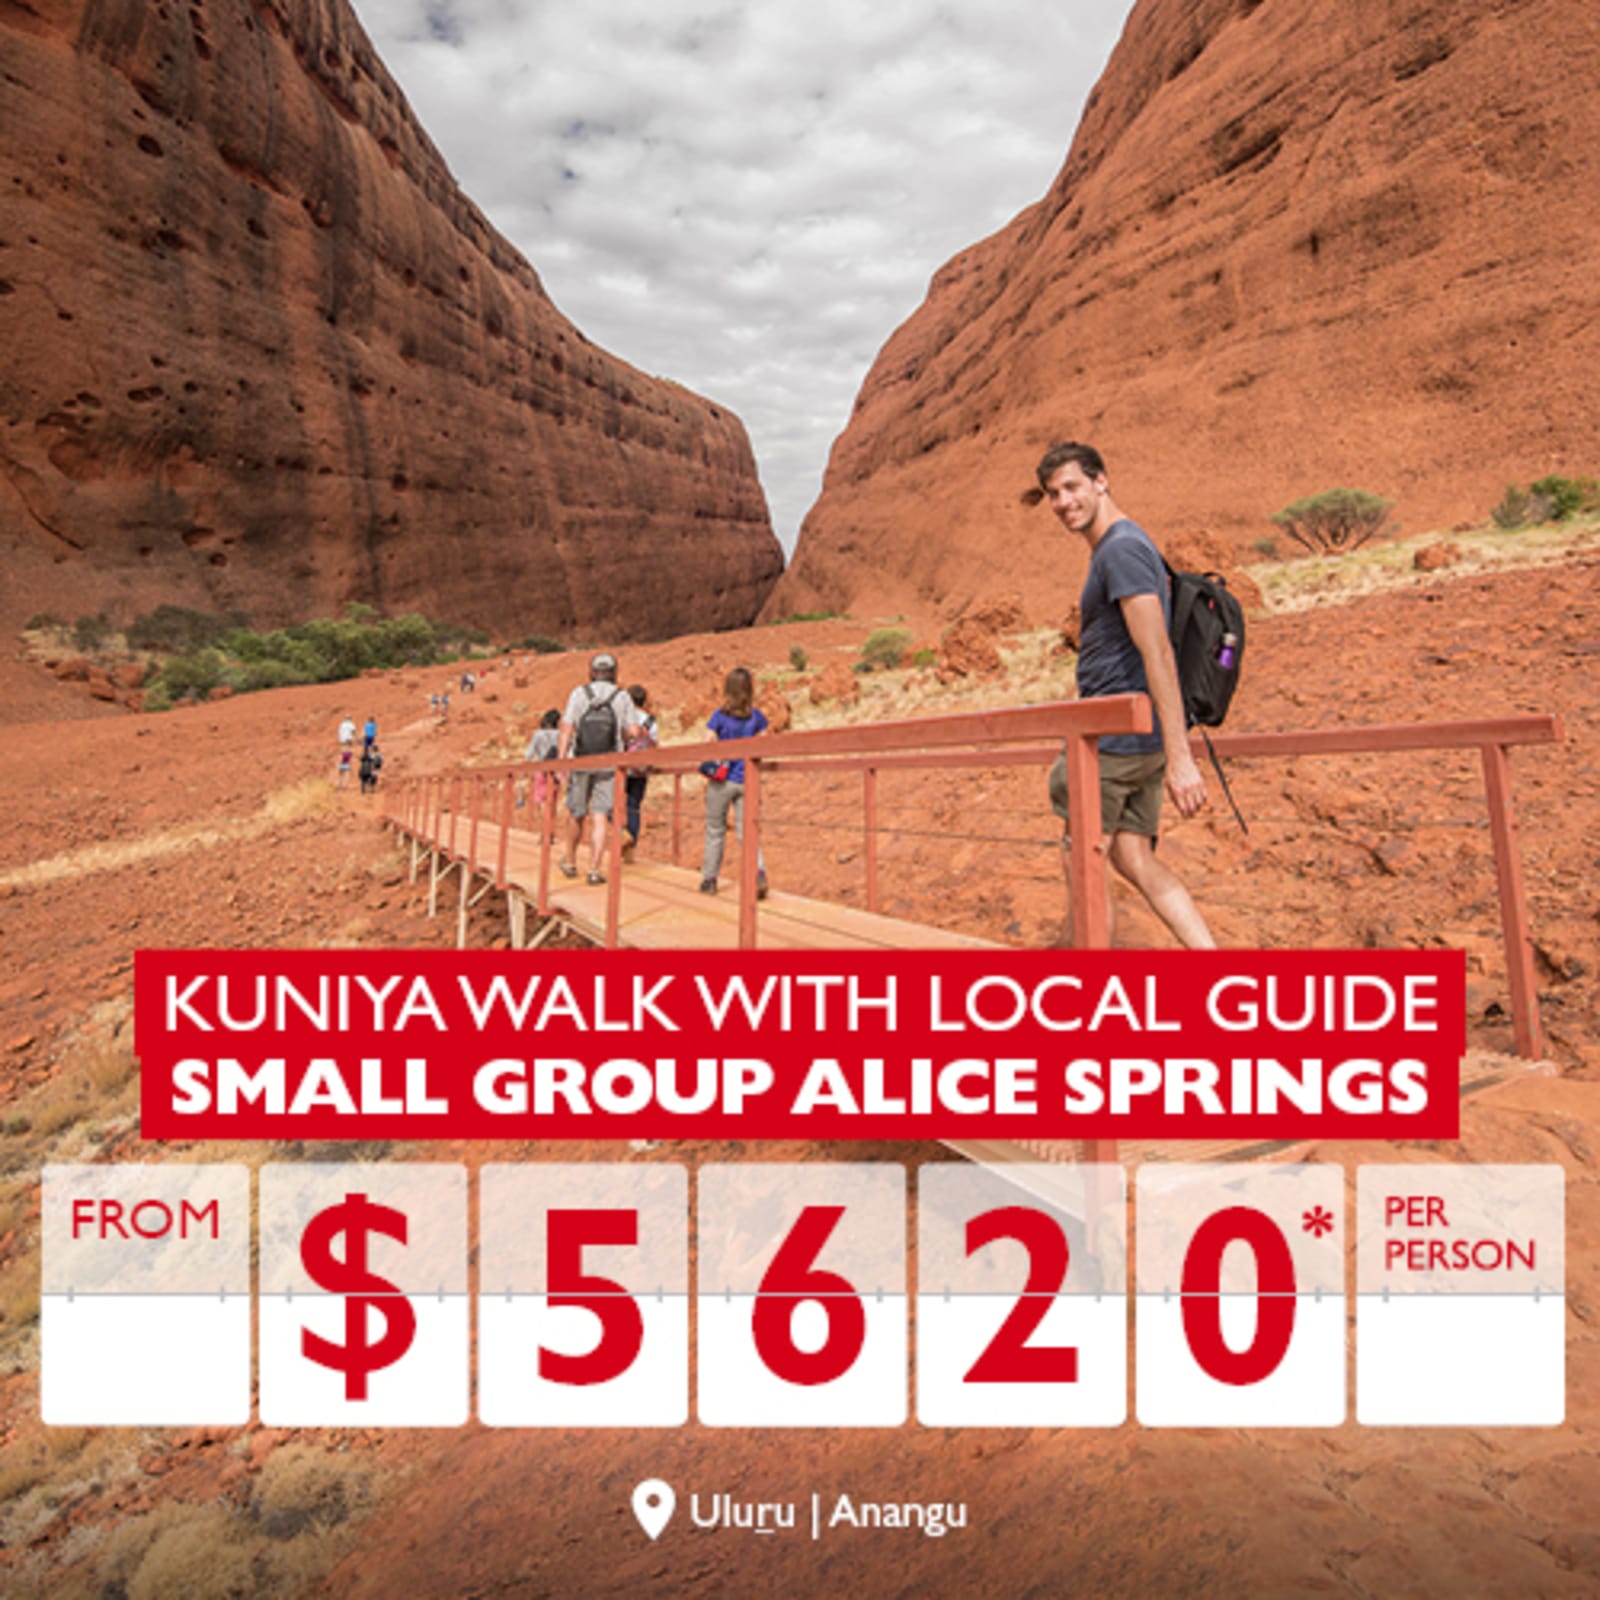 Kuniya walk with local guide | Small group Alice Springs from $5620* per person